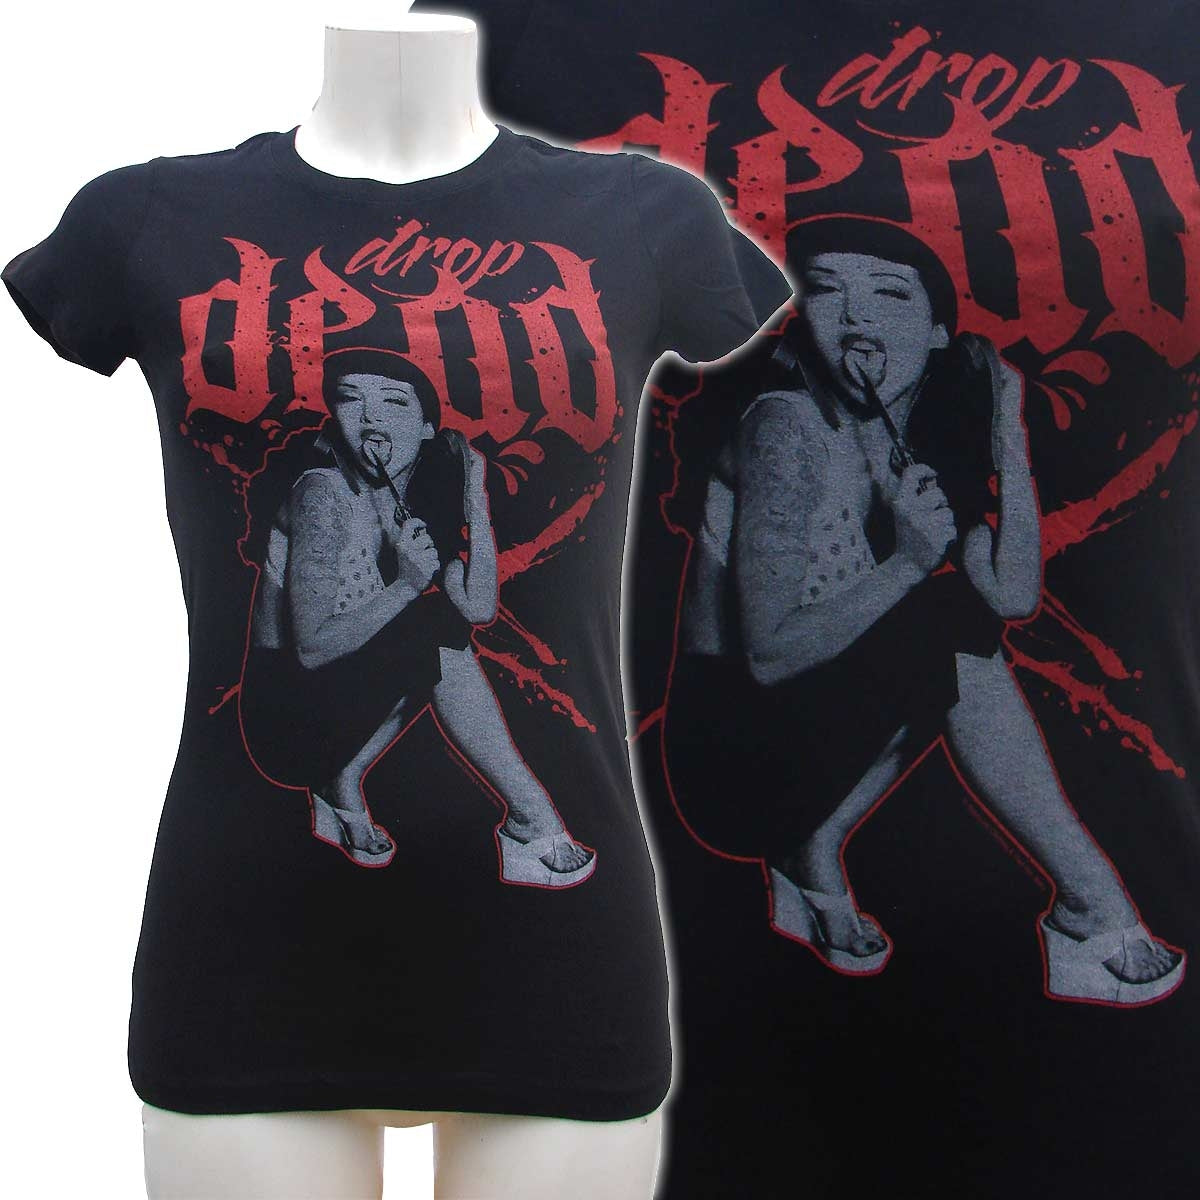 Shop everything from Drop Dead Clothing